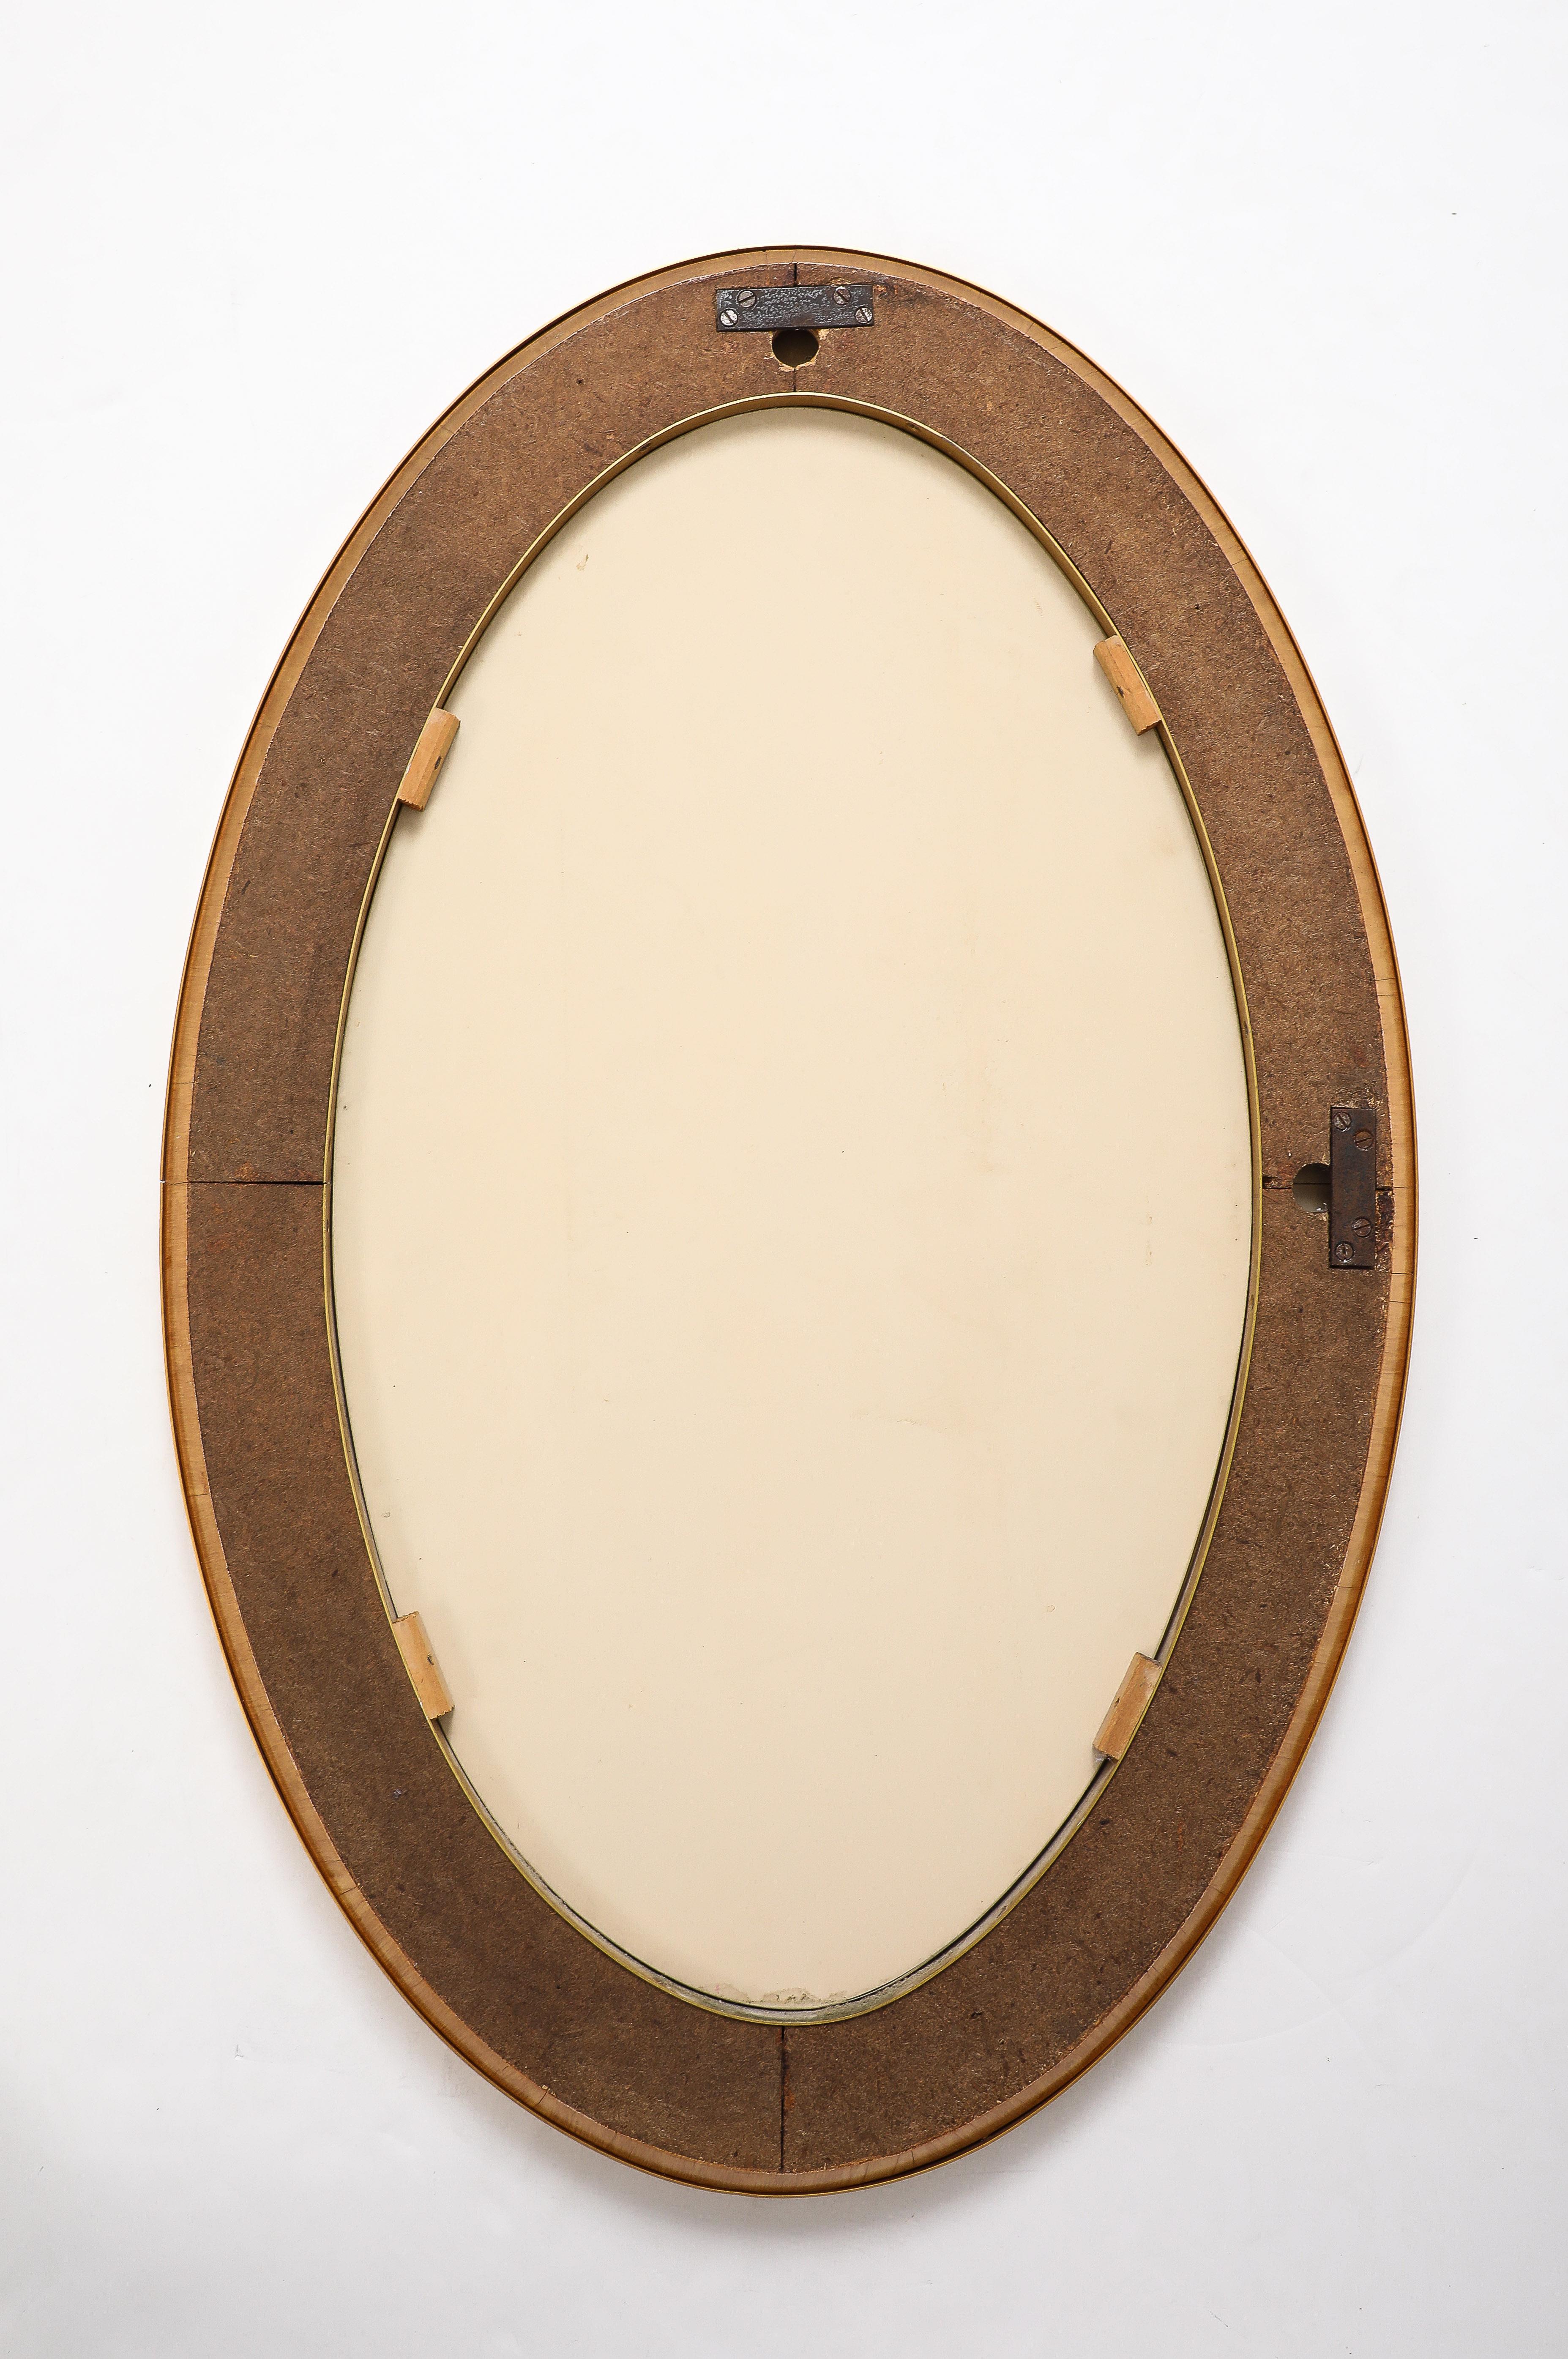 Cristal Art Oval Gold Hand-Cut Beveled Glass Mirror Model 2727, 1950s For Sale 8